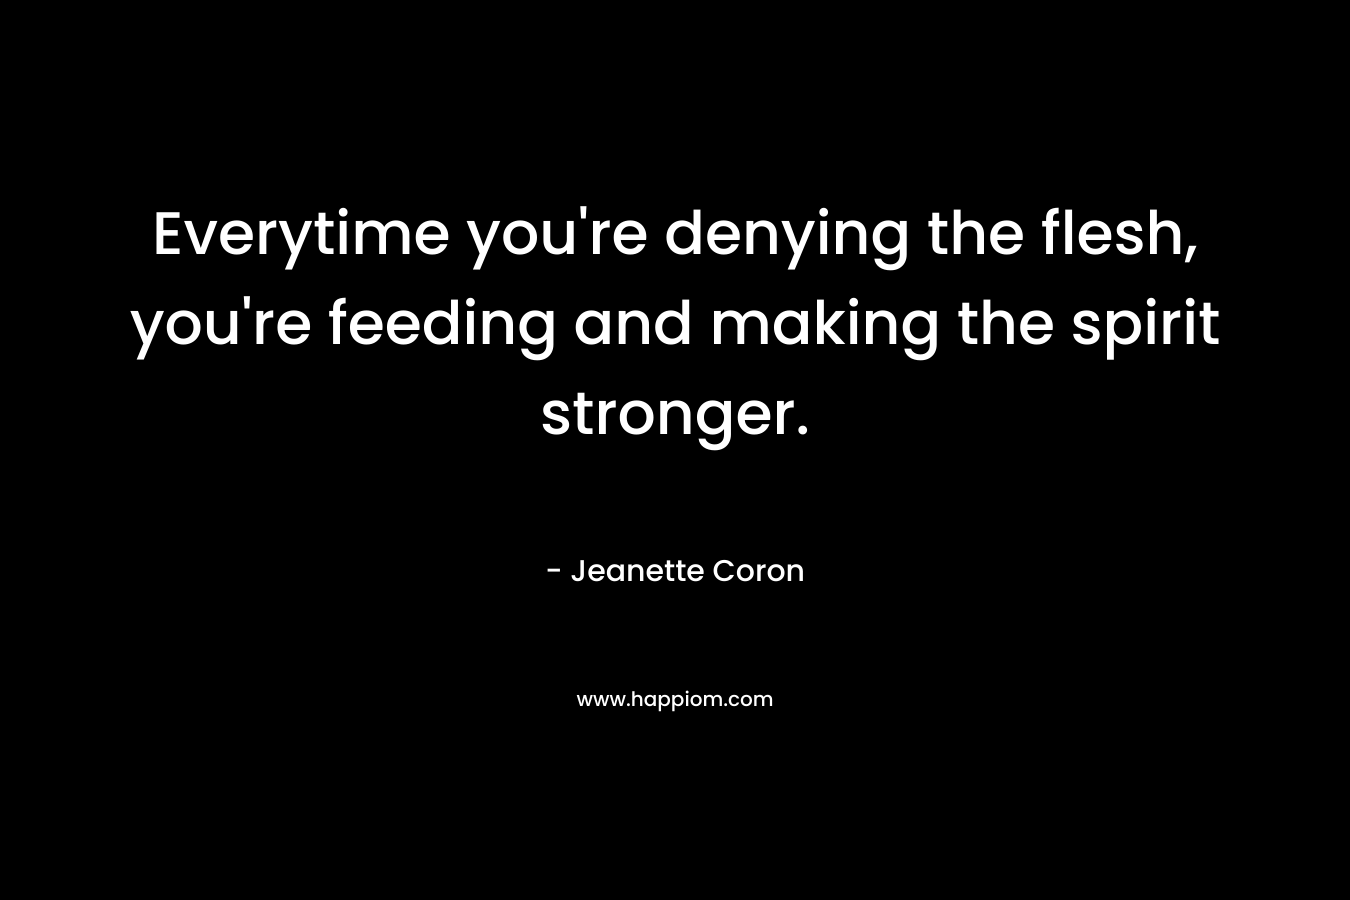 Everytime you're denying the flesh, you're feeding and making the spirit stronger.